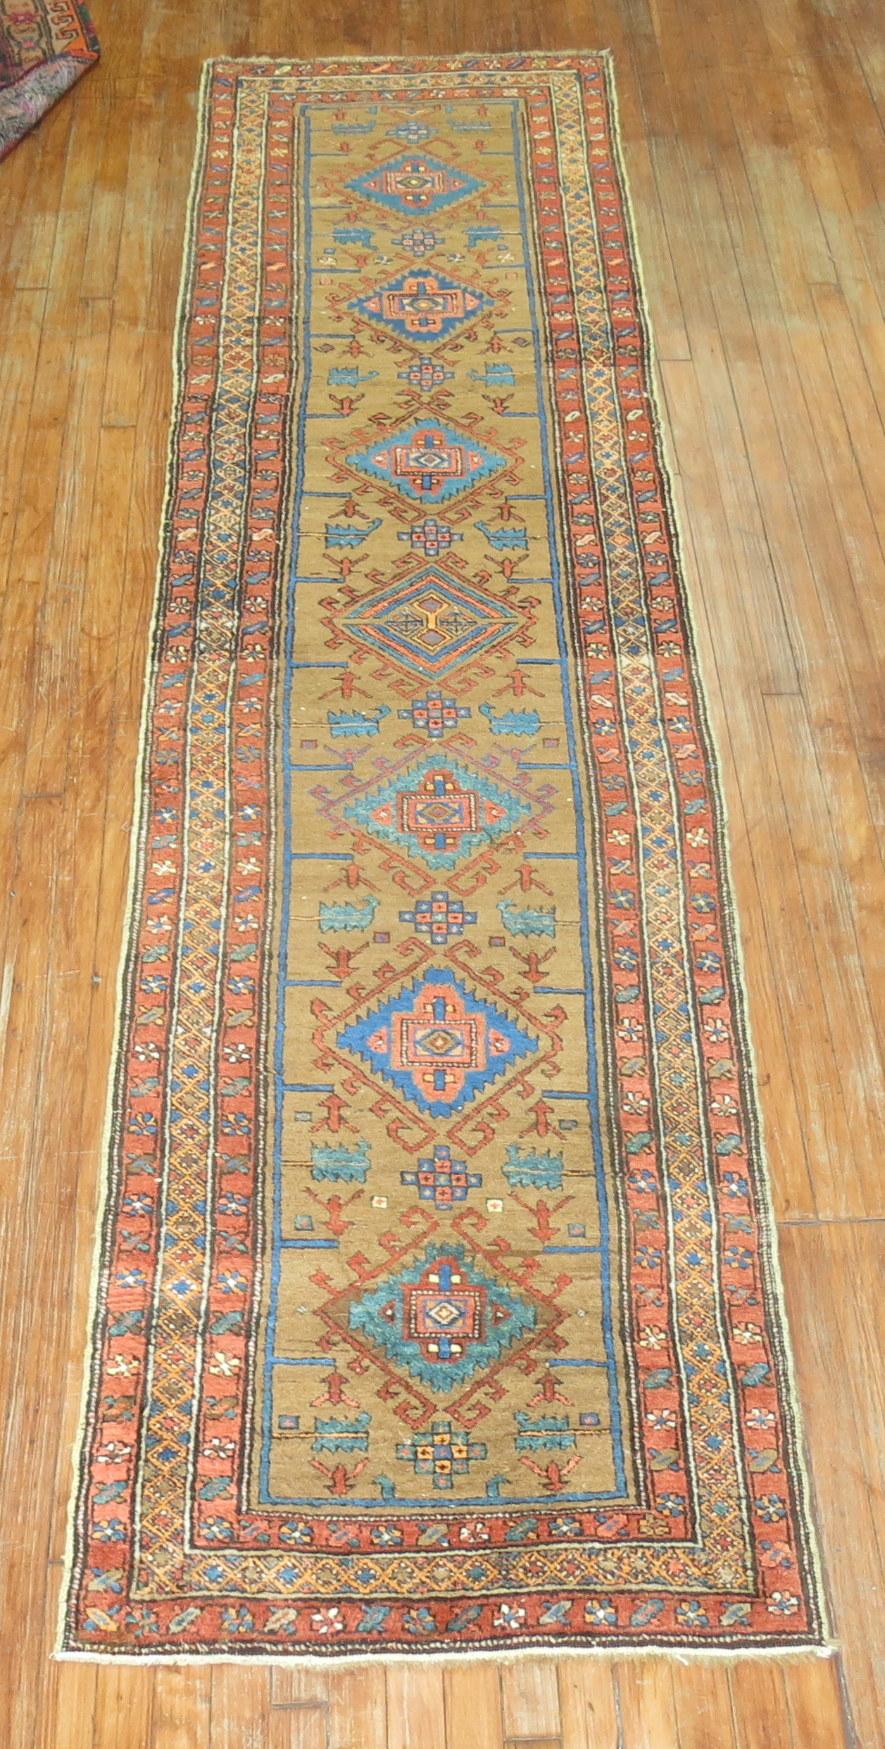 1930s Persian Heriz runner. Camel field, medallions in soft blue and green. Orange teal and orange accents throughout.

Measures: 2'7